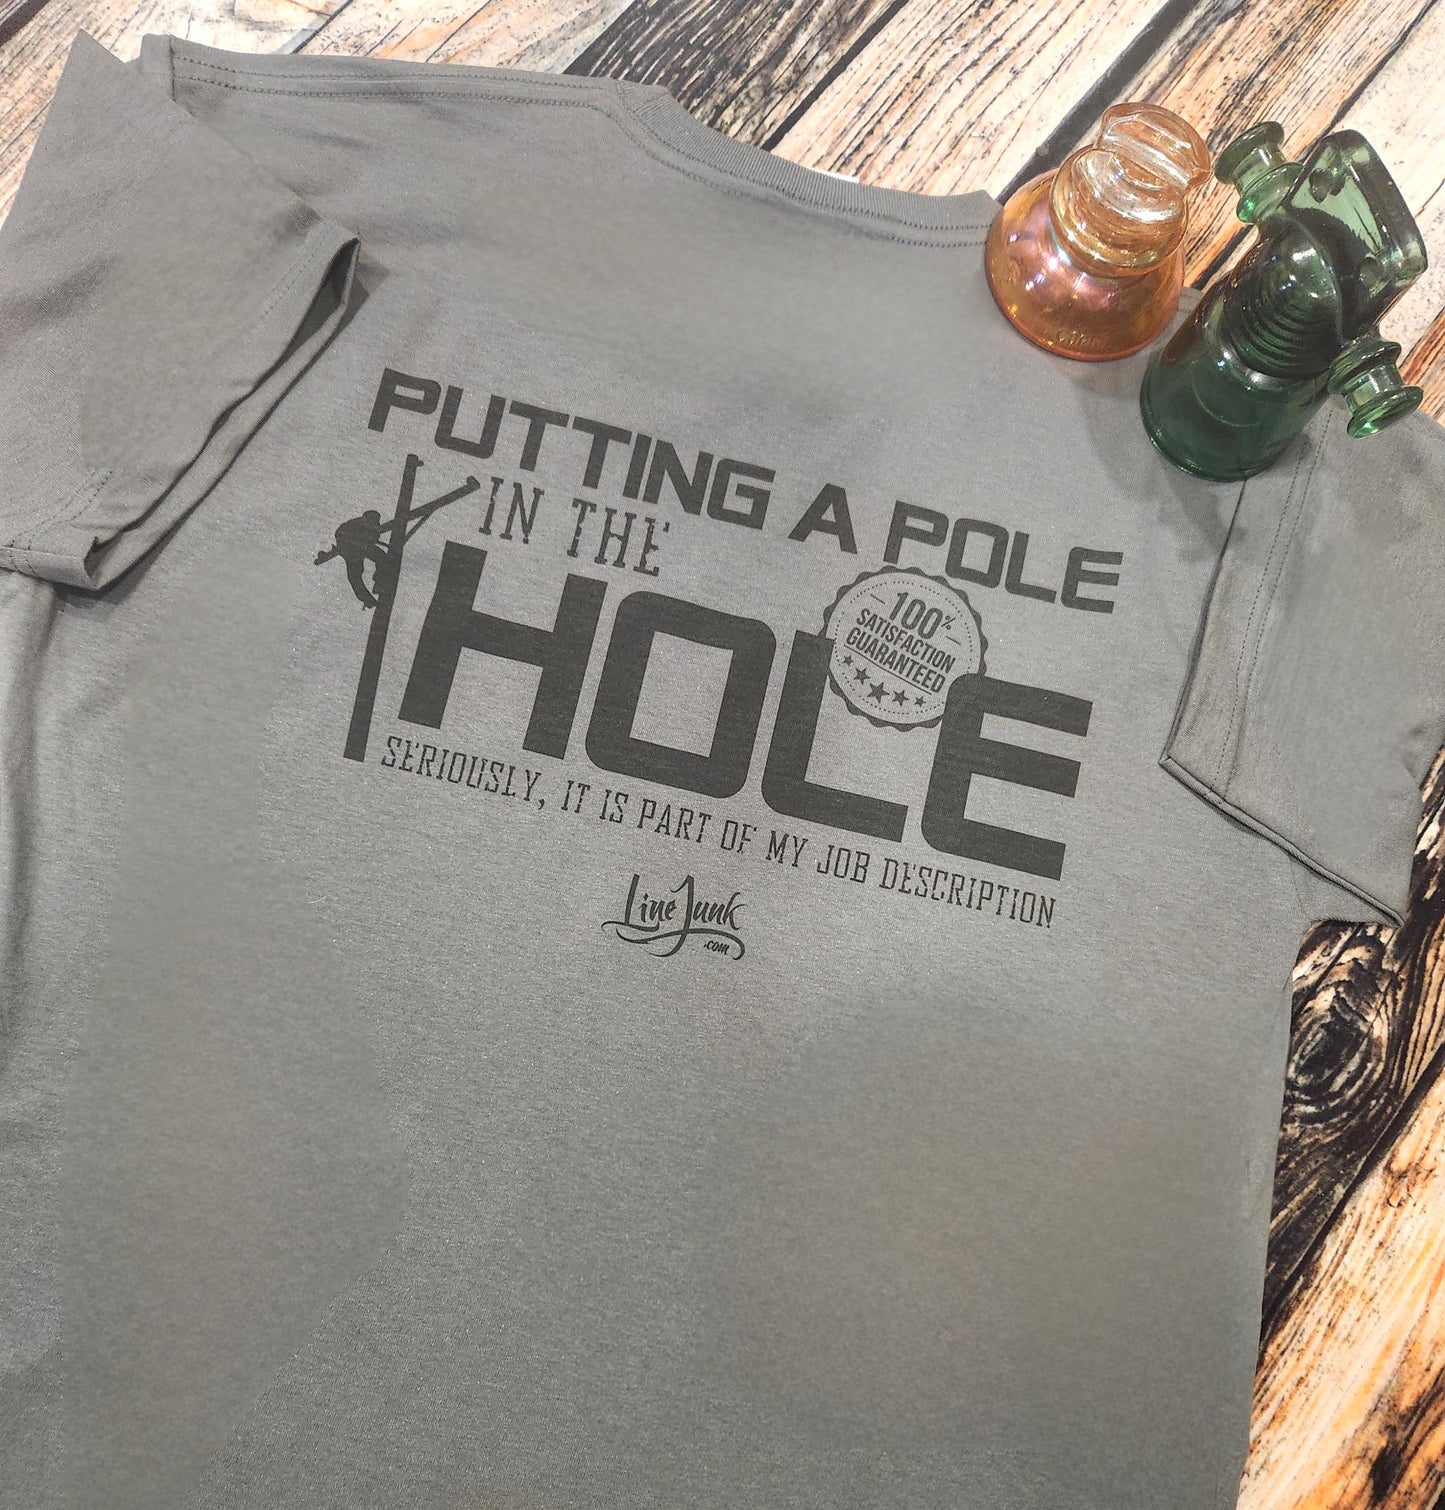 Putting A Pole in The Hole